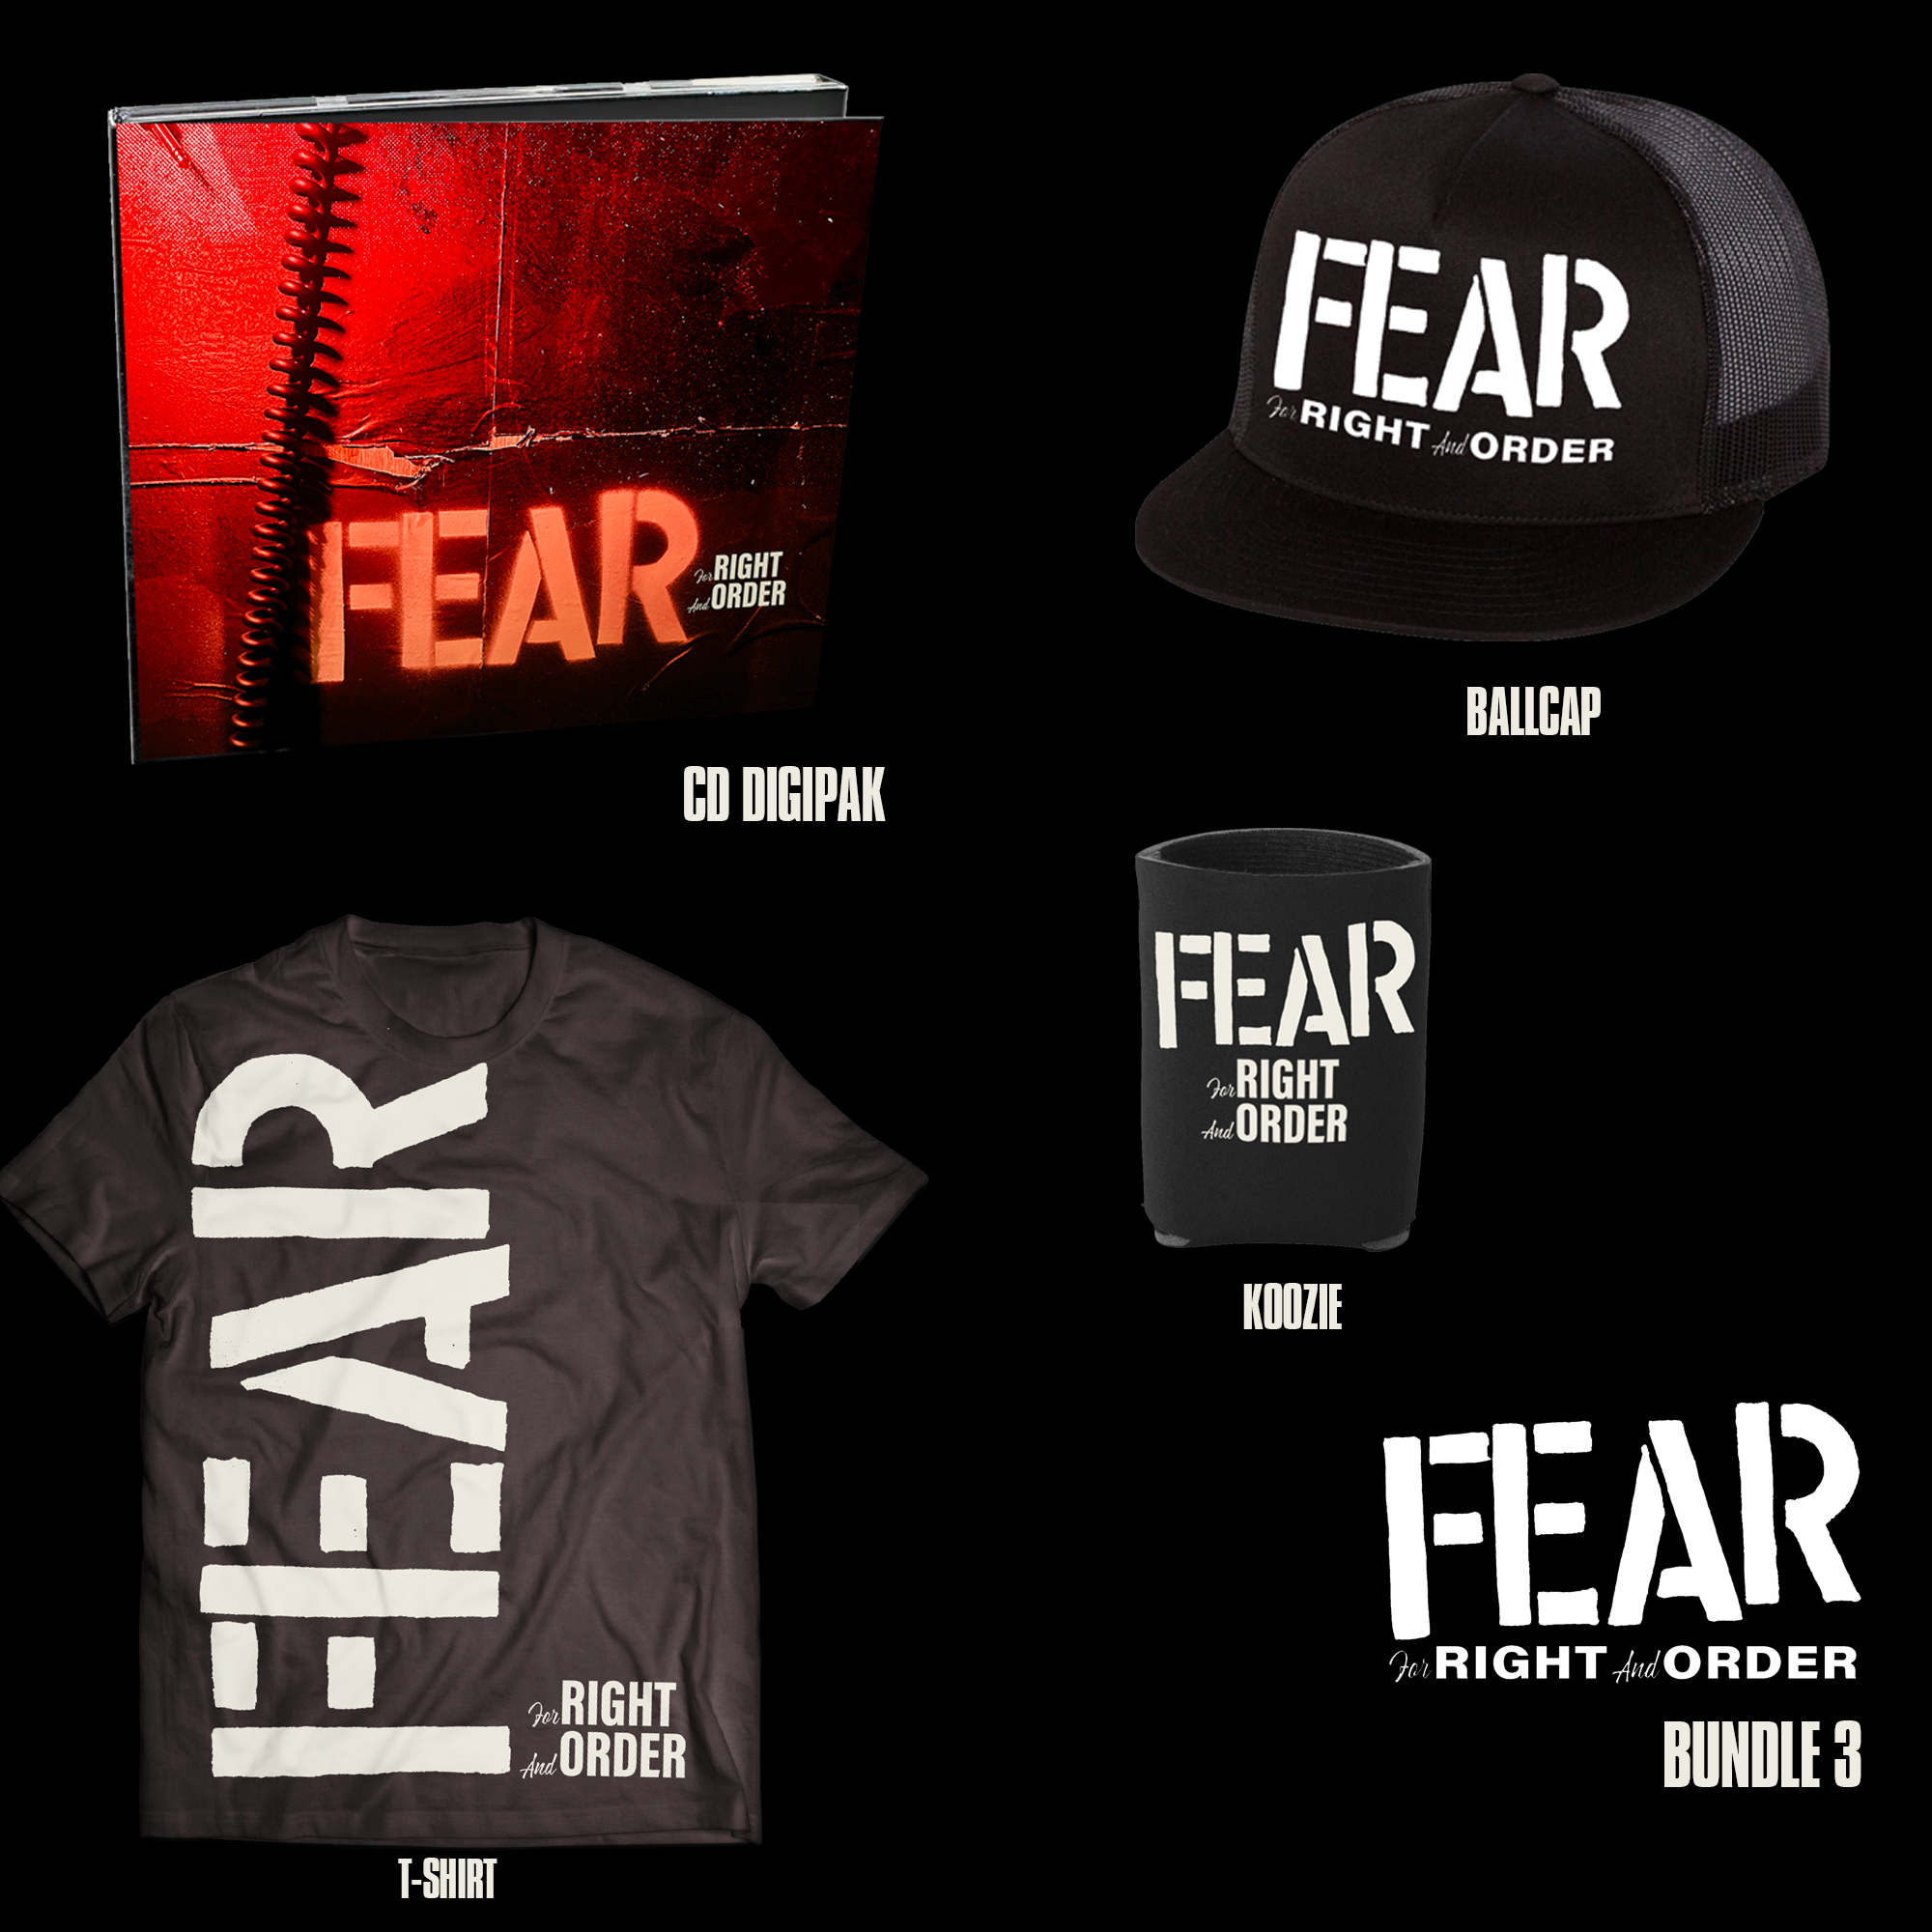 FEAR "FOR RIGHT AND ORDER" LIMITED EDITION DELUXE BUNDLE 3